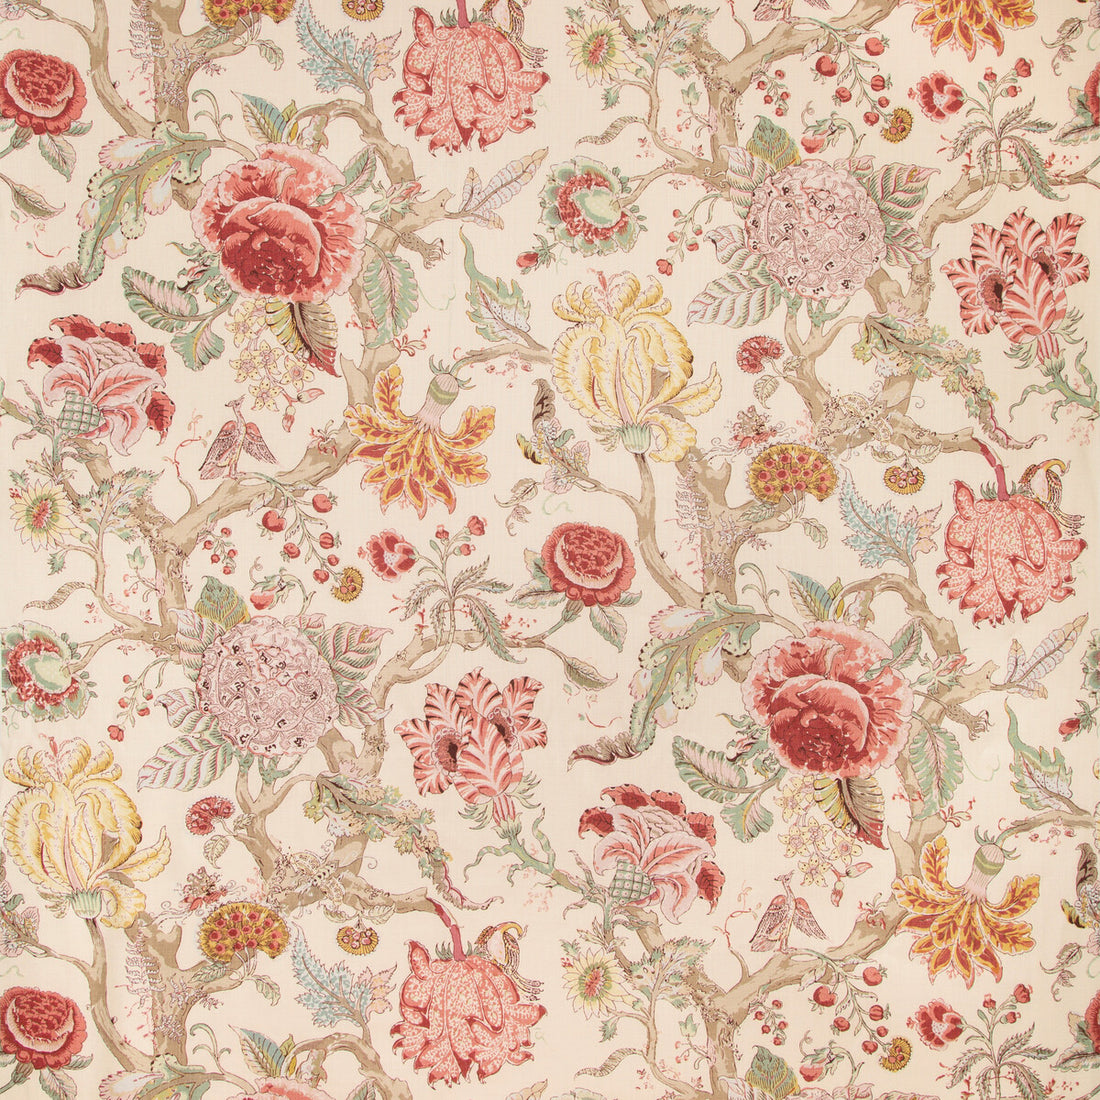 Adlington fabric in rose color - pattern 2019102.147.0 - by Lee Jofa in the Manor House collection